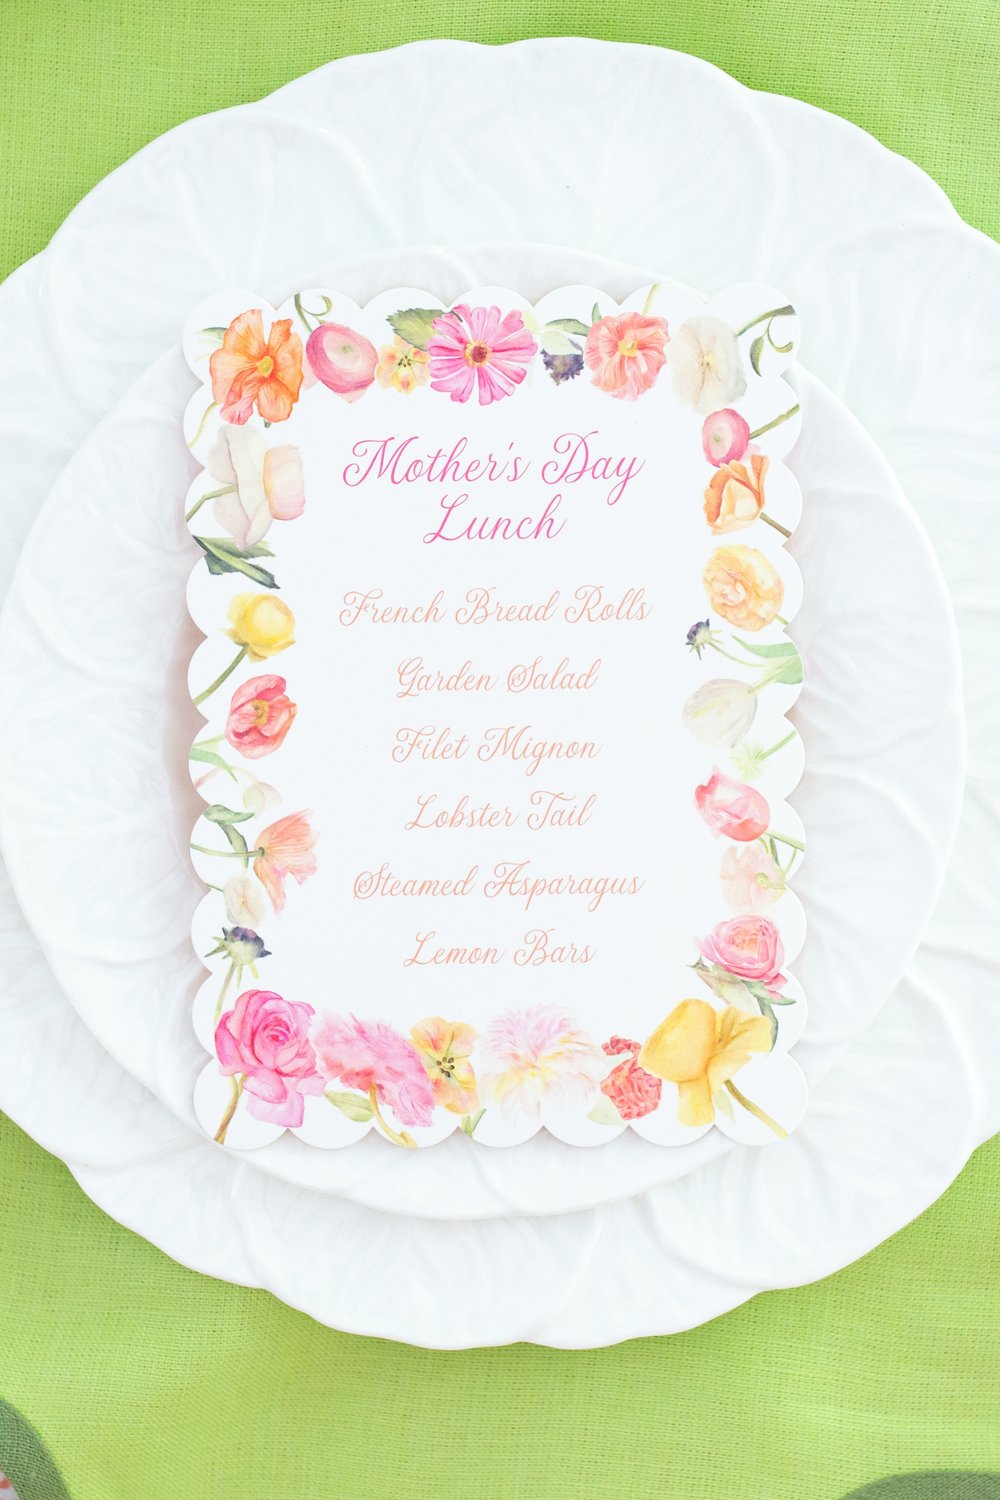 Custom Mother's Day Lunch Menus by CoCo Zentner featured by Darby Fallon Clark.jpg